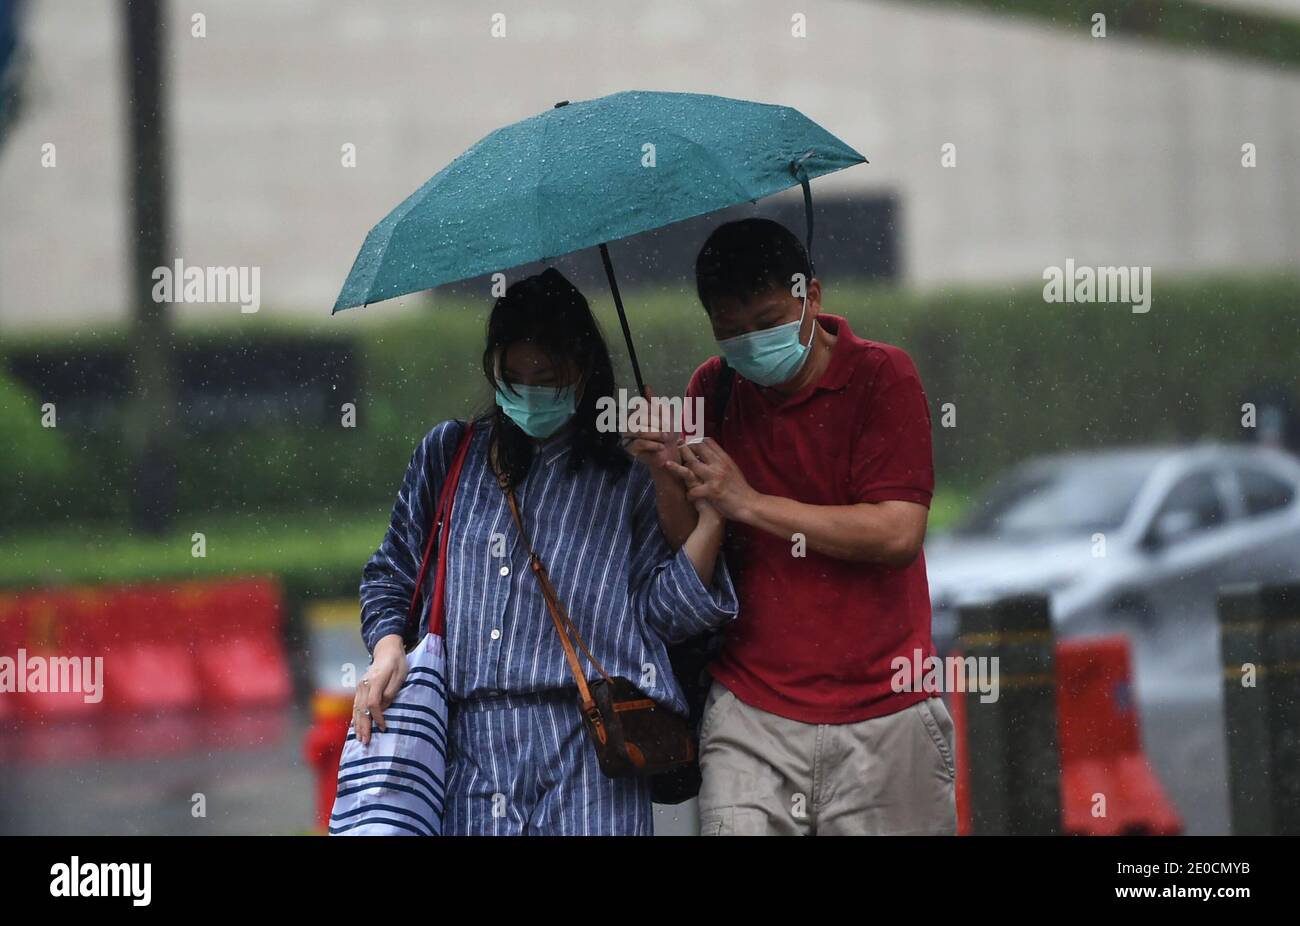 Jakarta, Indonesia. 31st Dec, 2020. Pedestrians wearing face masks walk in the rain in Jakarta, Indonesia, Dec. 31, 2020. The COVID-19 cases in Indonesia rose by 8,074 within one day to 743,198, with the death toll adding by 194 to 22,138, the Health Ministry said on Thursday. Credit: Zulkarnain/Xinhua/Alamy Live News Stock Photo